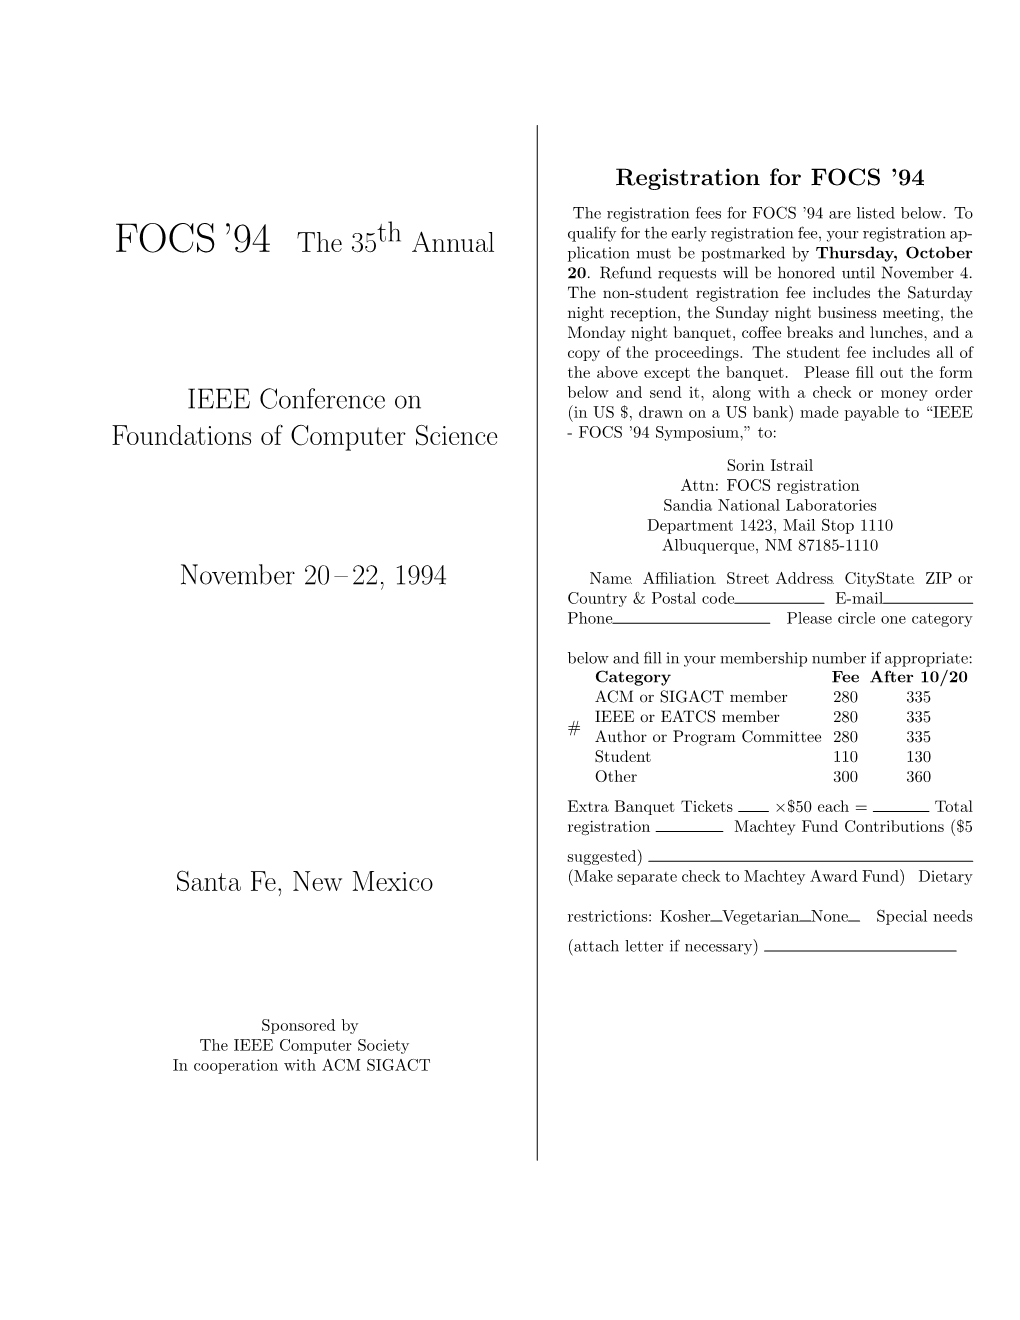 FOCS '94 the 35Thannual IEEE Conference on Foundations Of